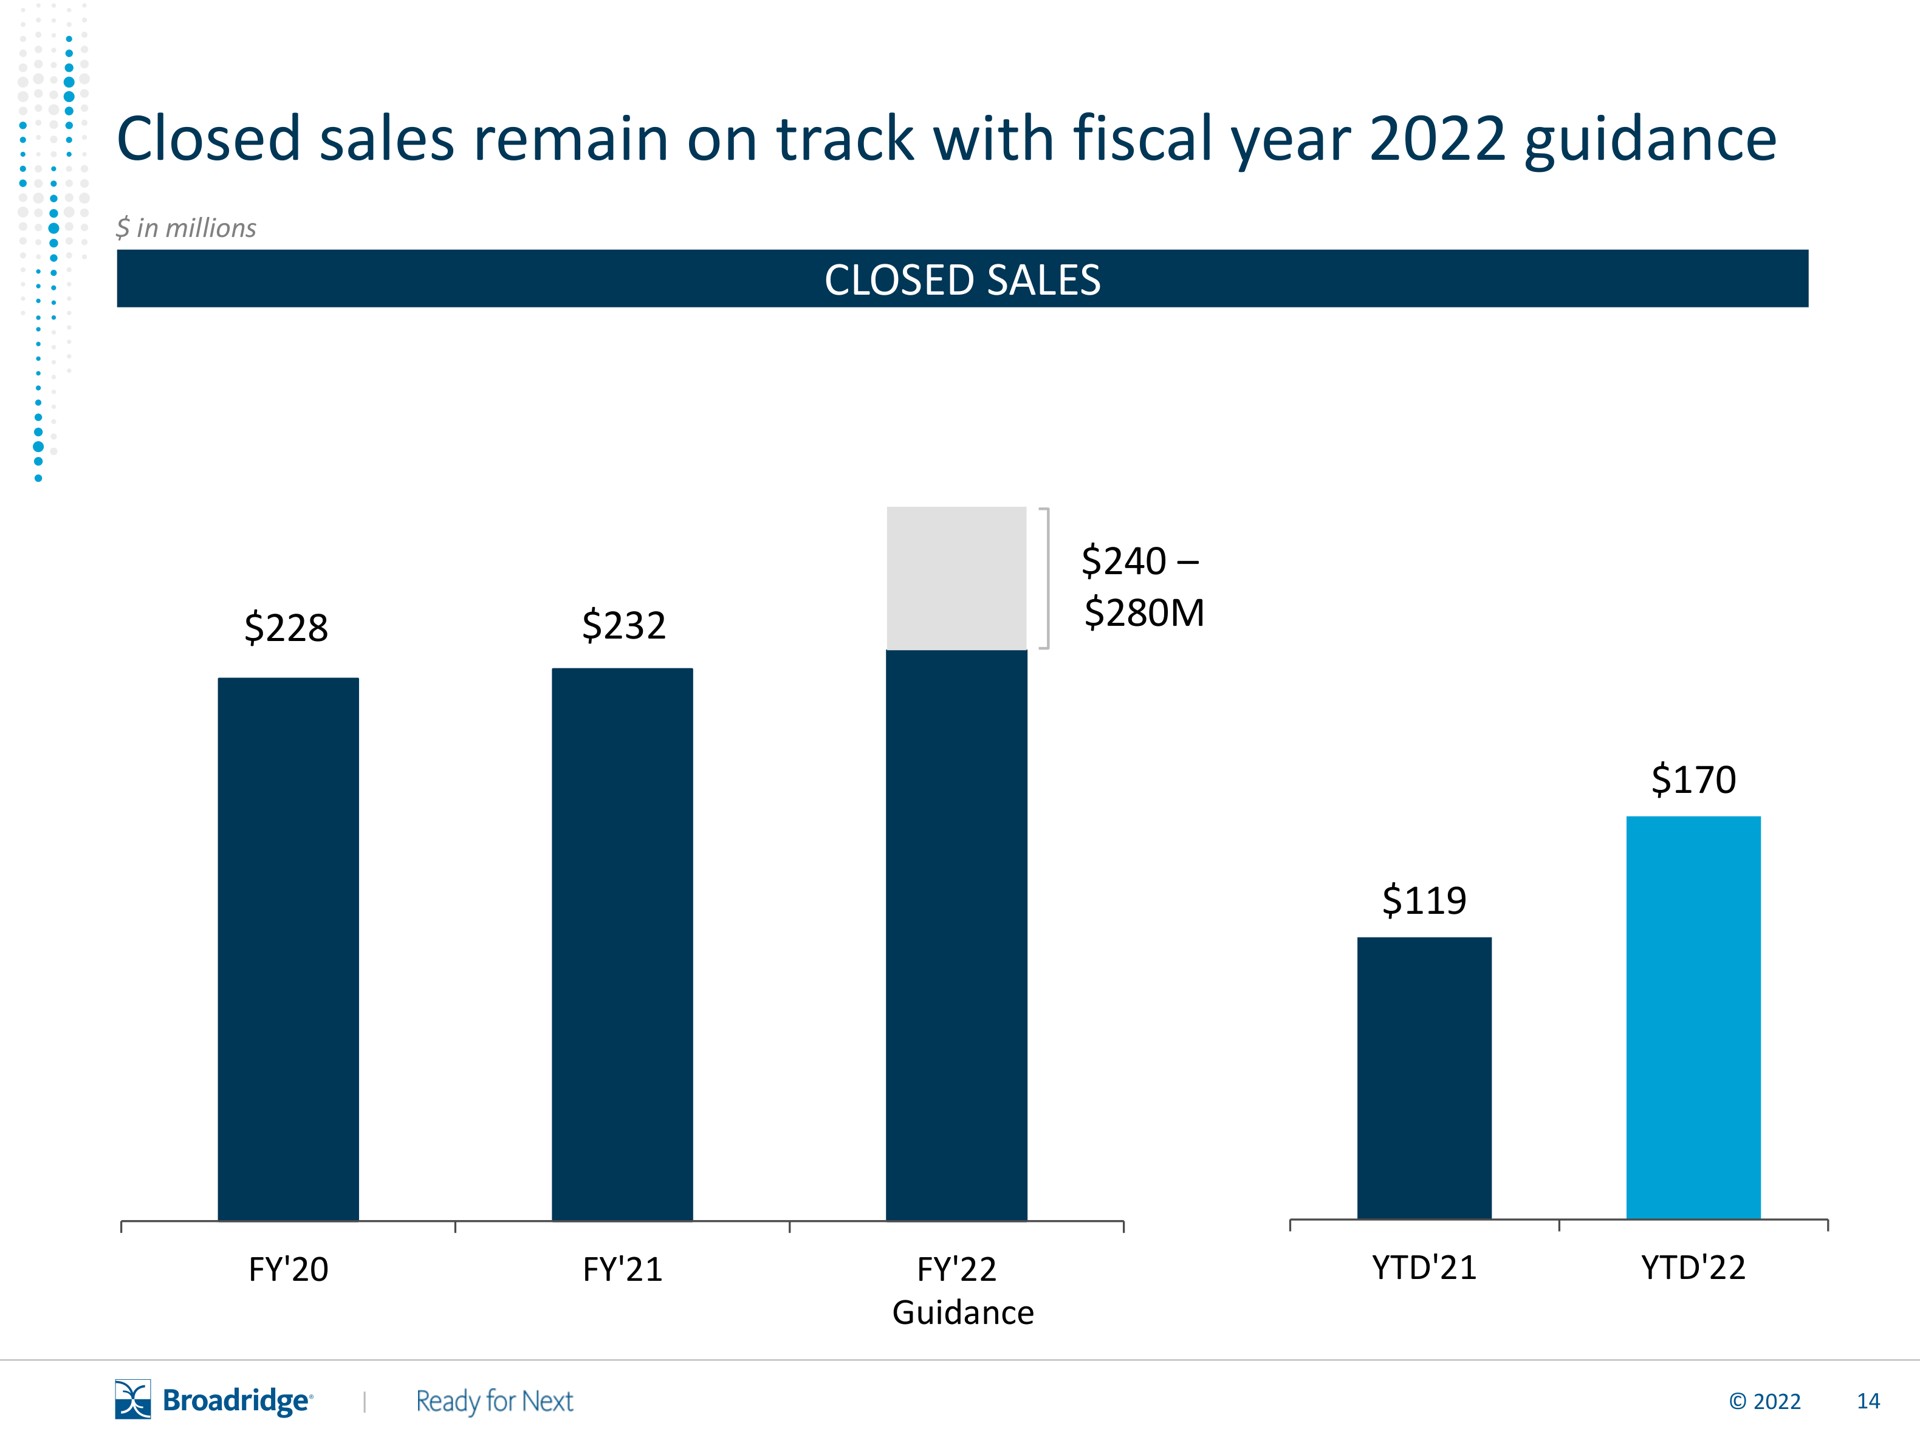 closed sales remain on track with fiscal year guidance | Broadridge Financial Solutions